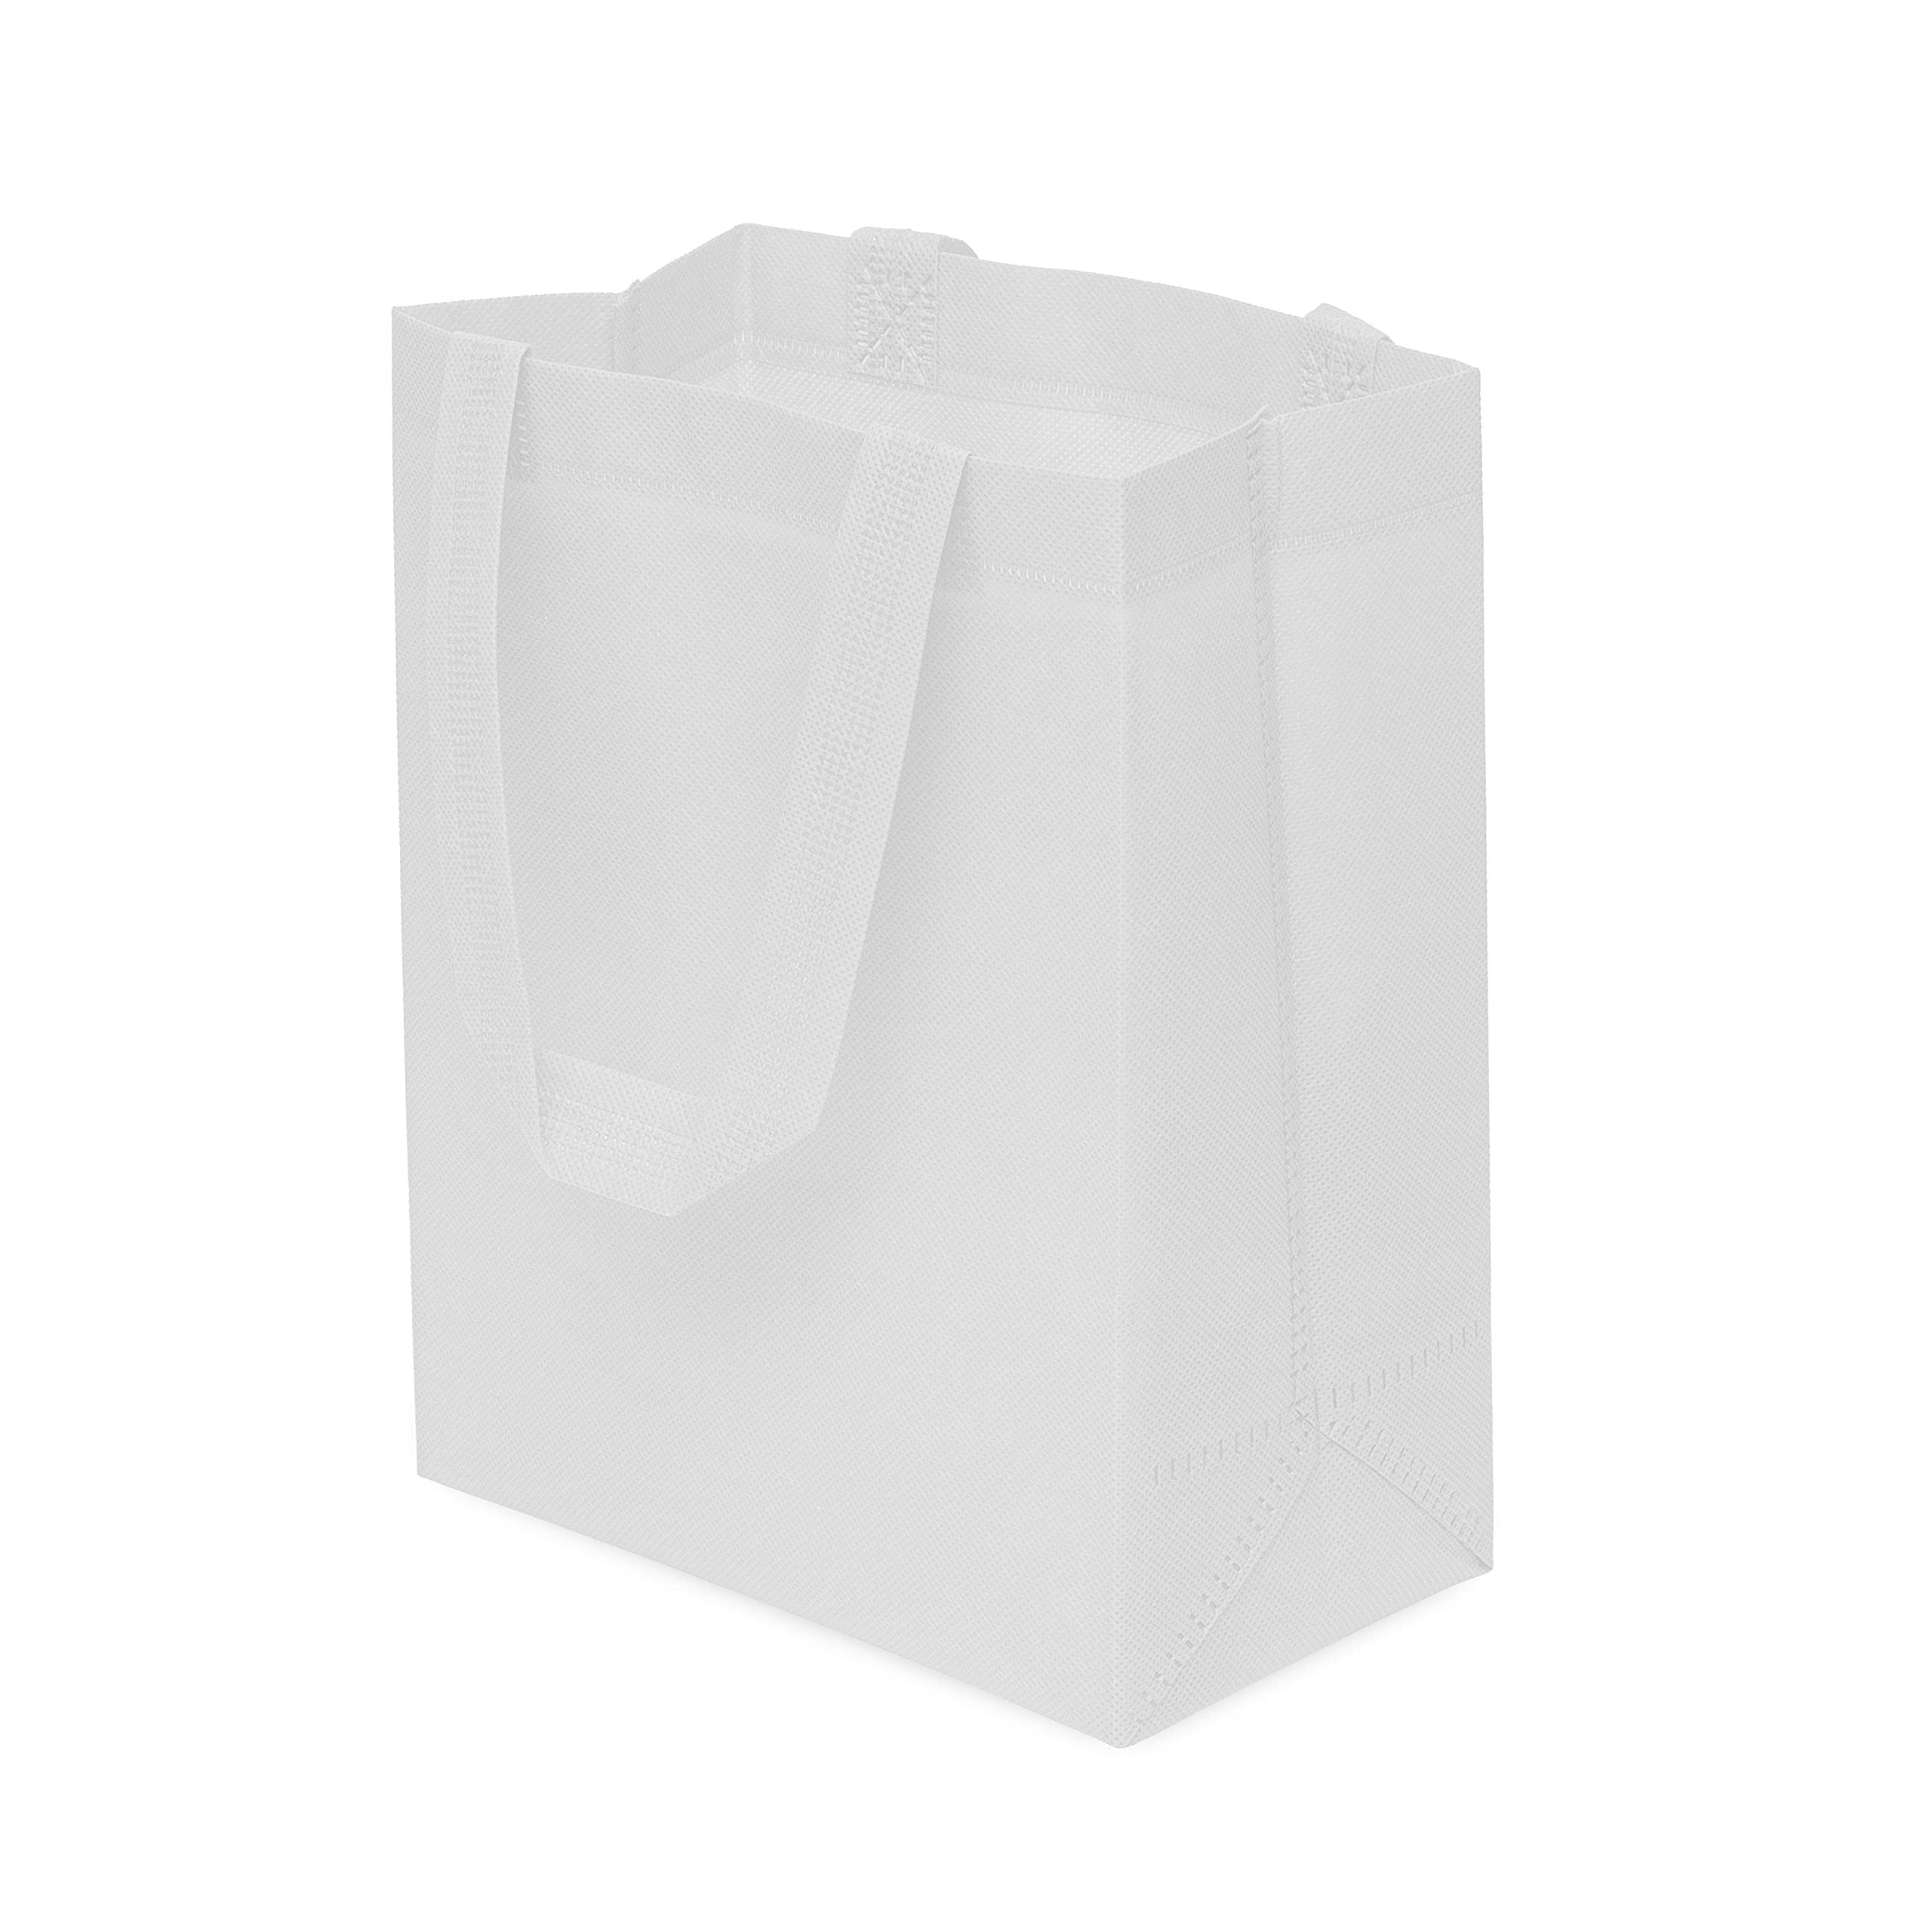 8x4x10 Inch White Reusable Gift Bags - 12 Pack Eco-Friendly Totes for Shopping and Events